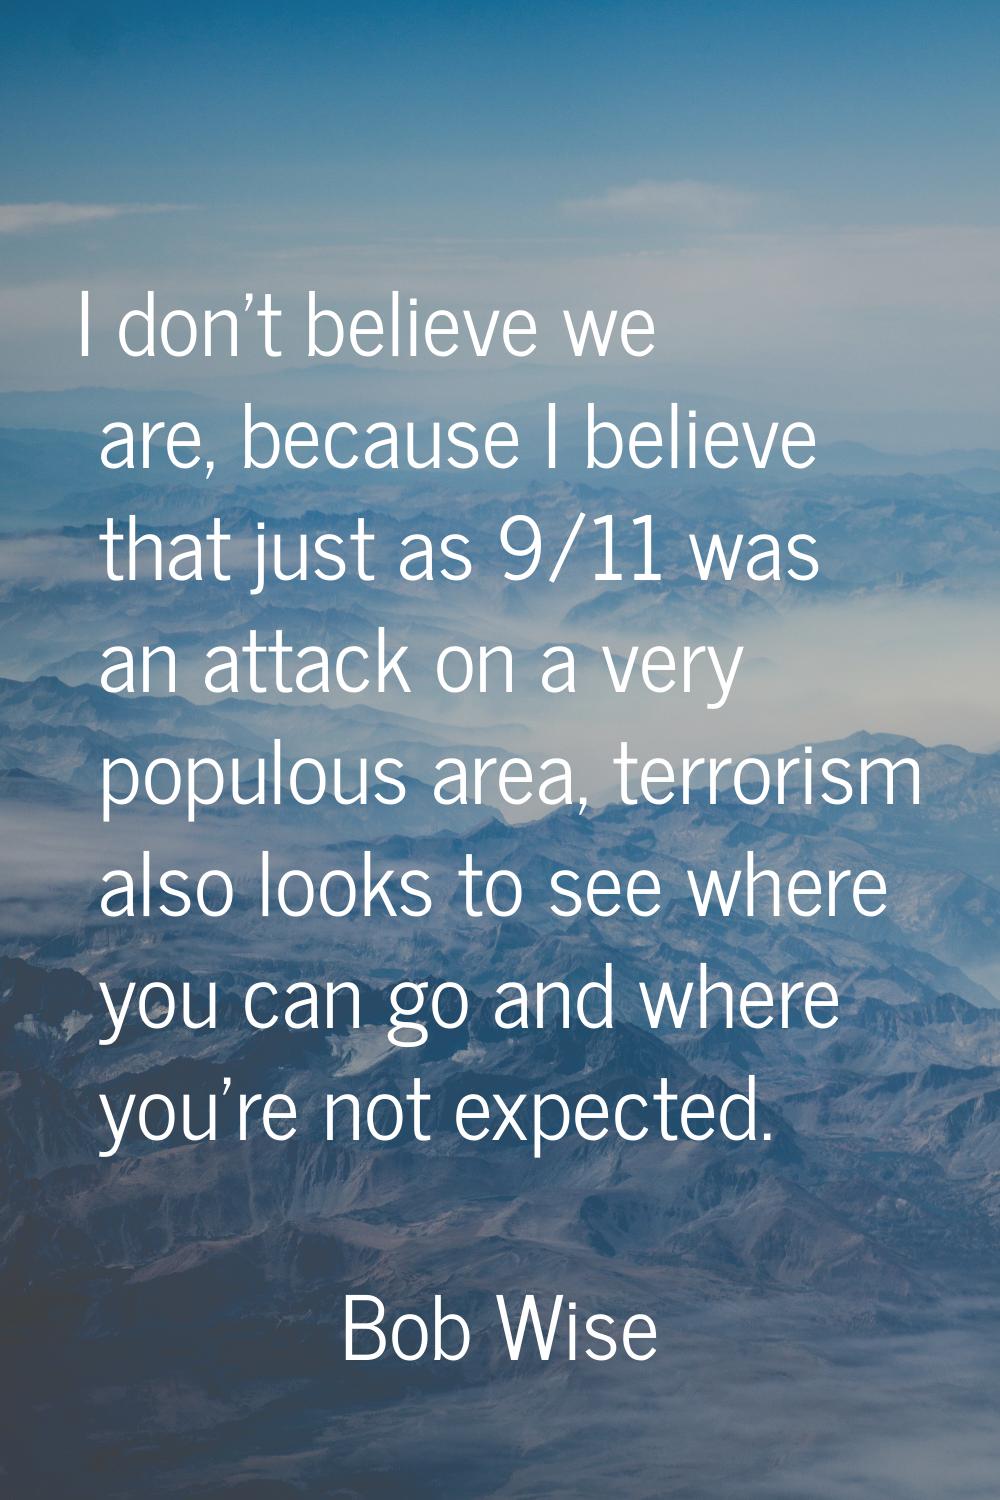 I don't believe we are, because I believe that just as 9/11 was an attack on a very populous area, 